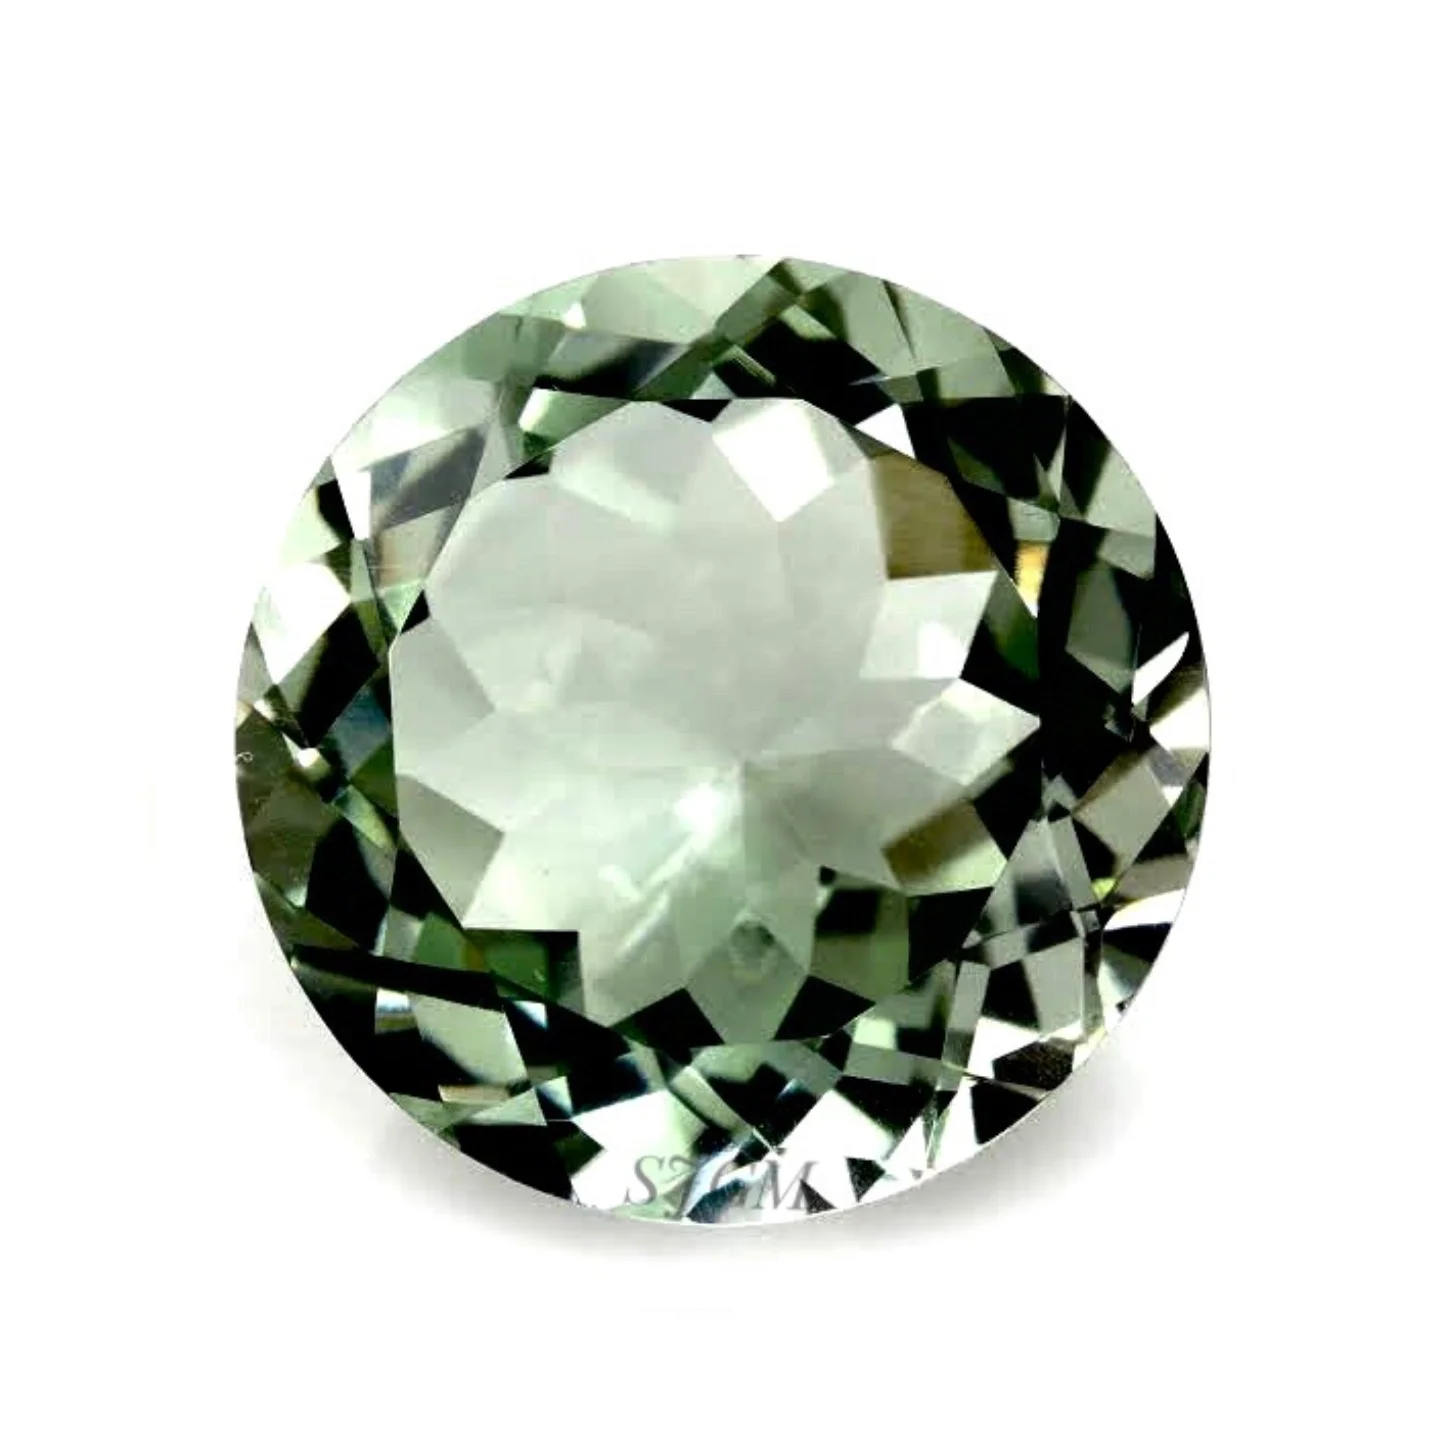 Most Popular Natural Green Amethyst 5mm to 15mm Round Faceted Cut Loose Gemstone 